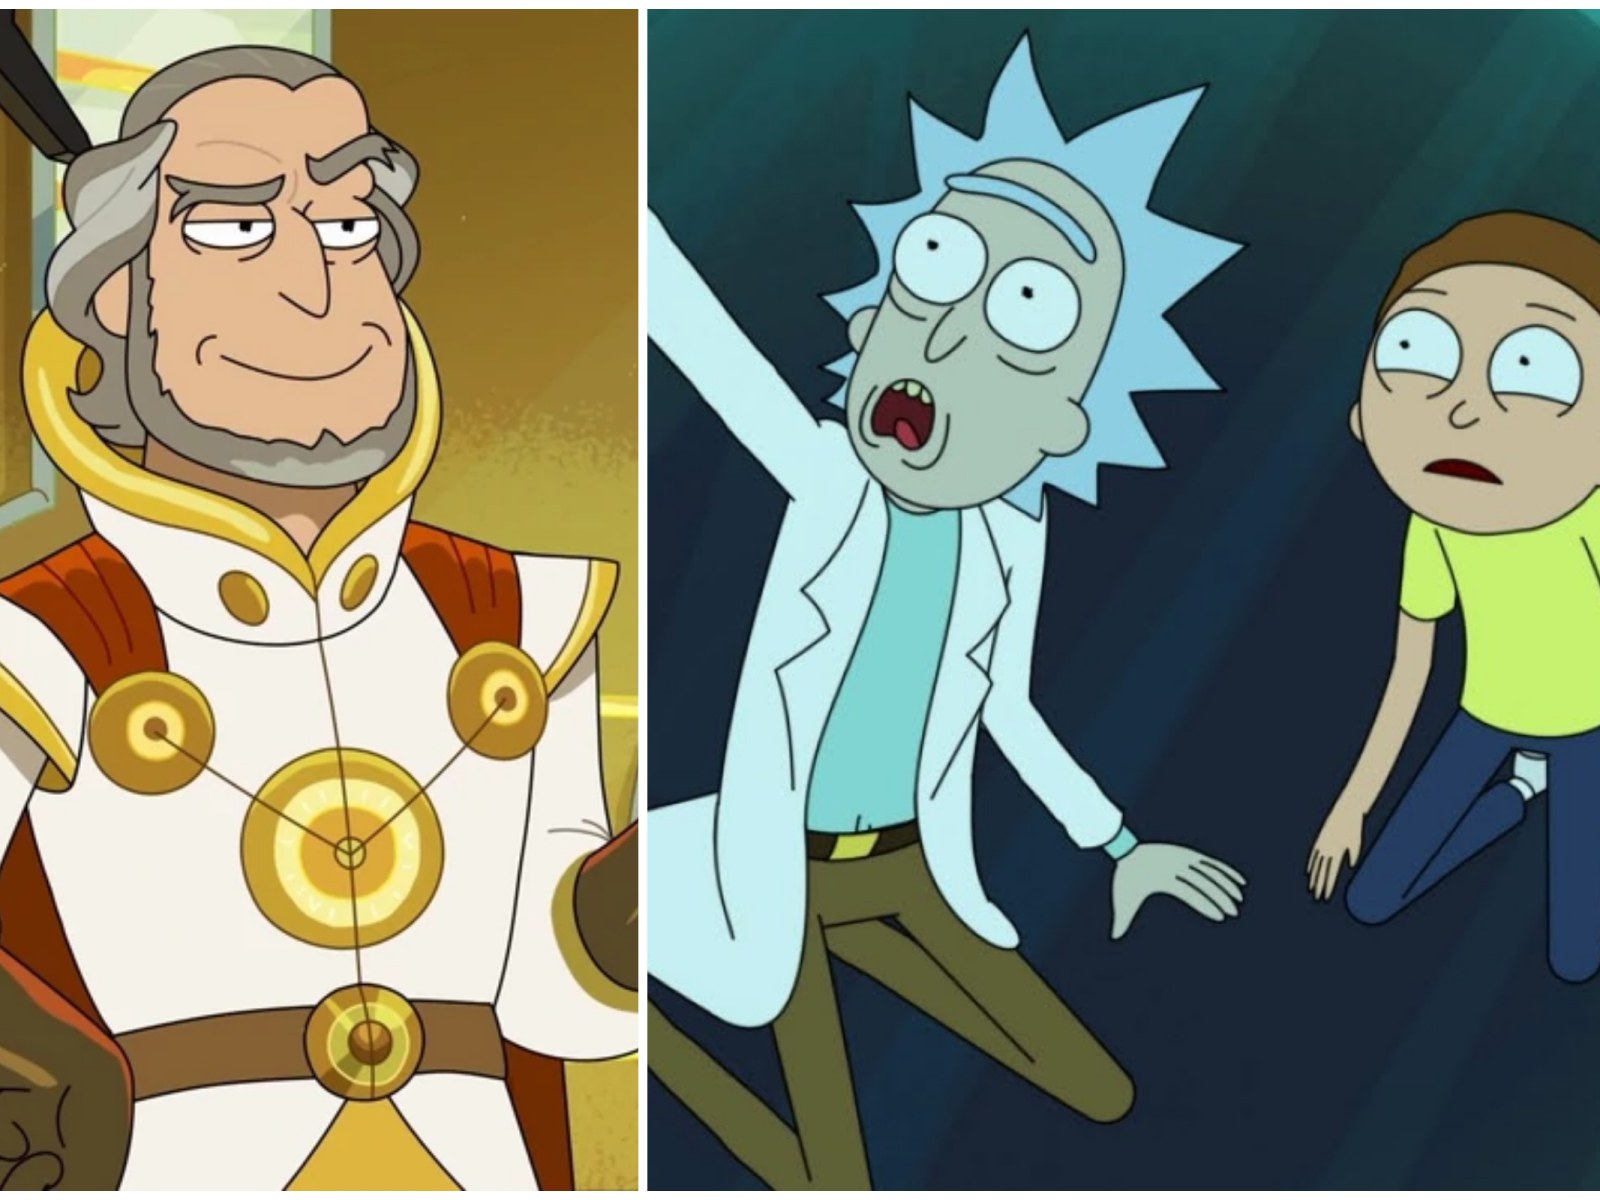 Rick and Morty' Season 6 Episode Title References Explained